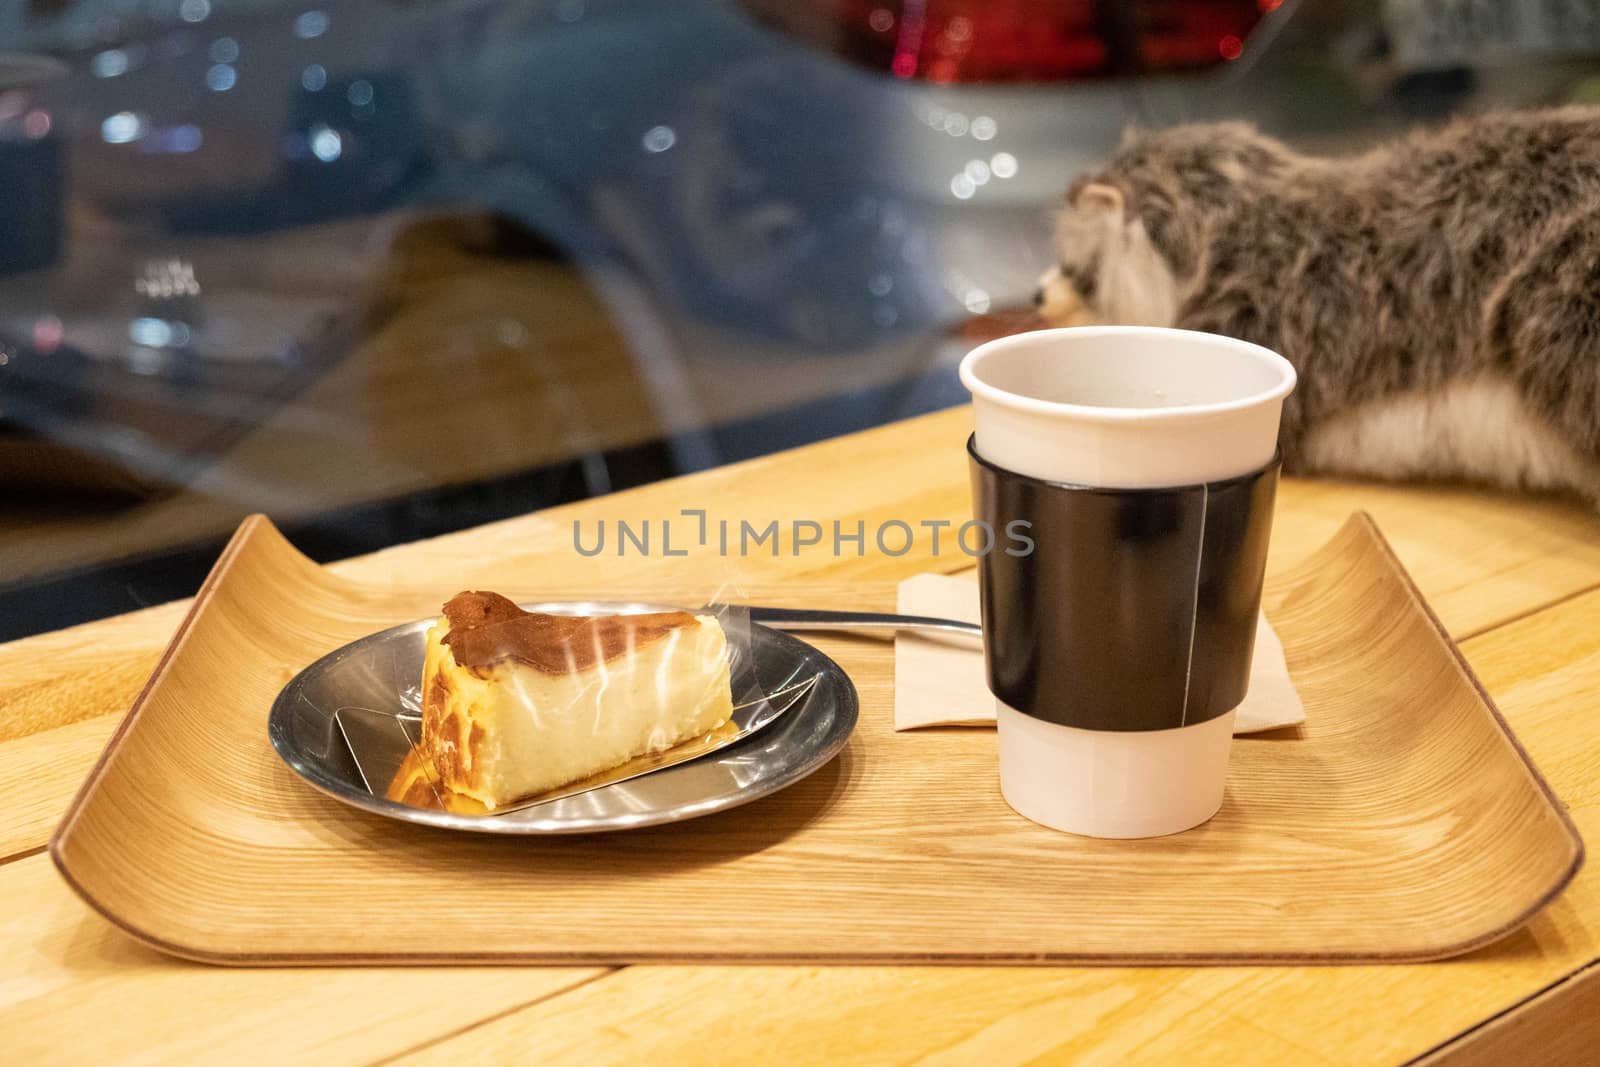 Cake and cup of coffee on wooden tray by uphotopia